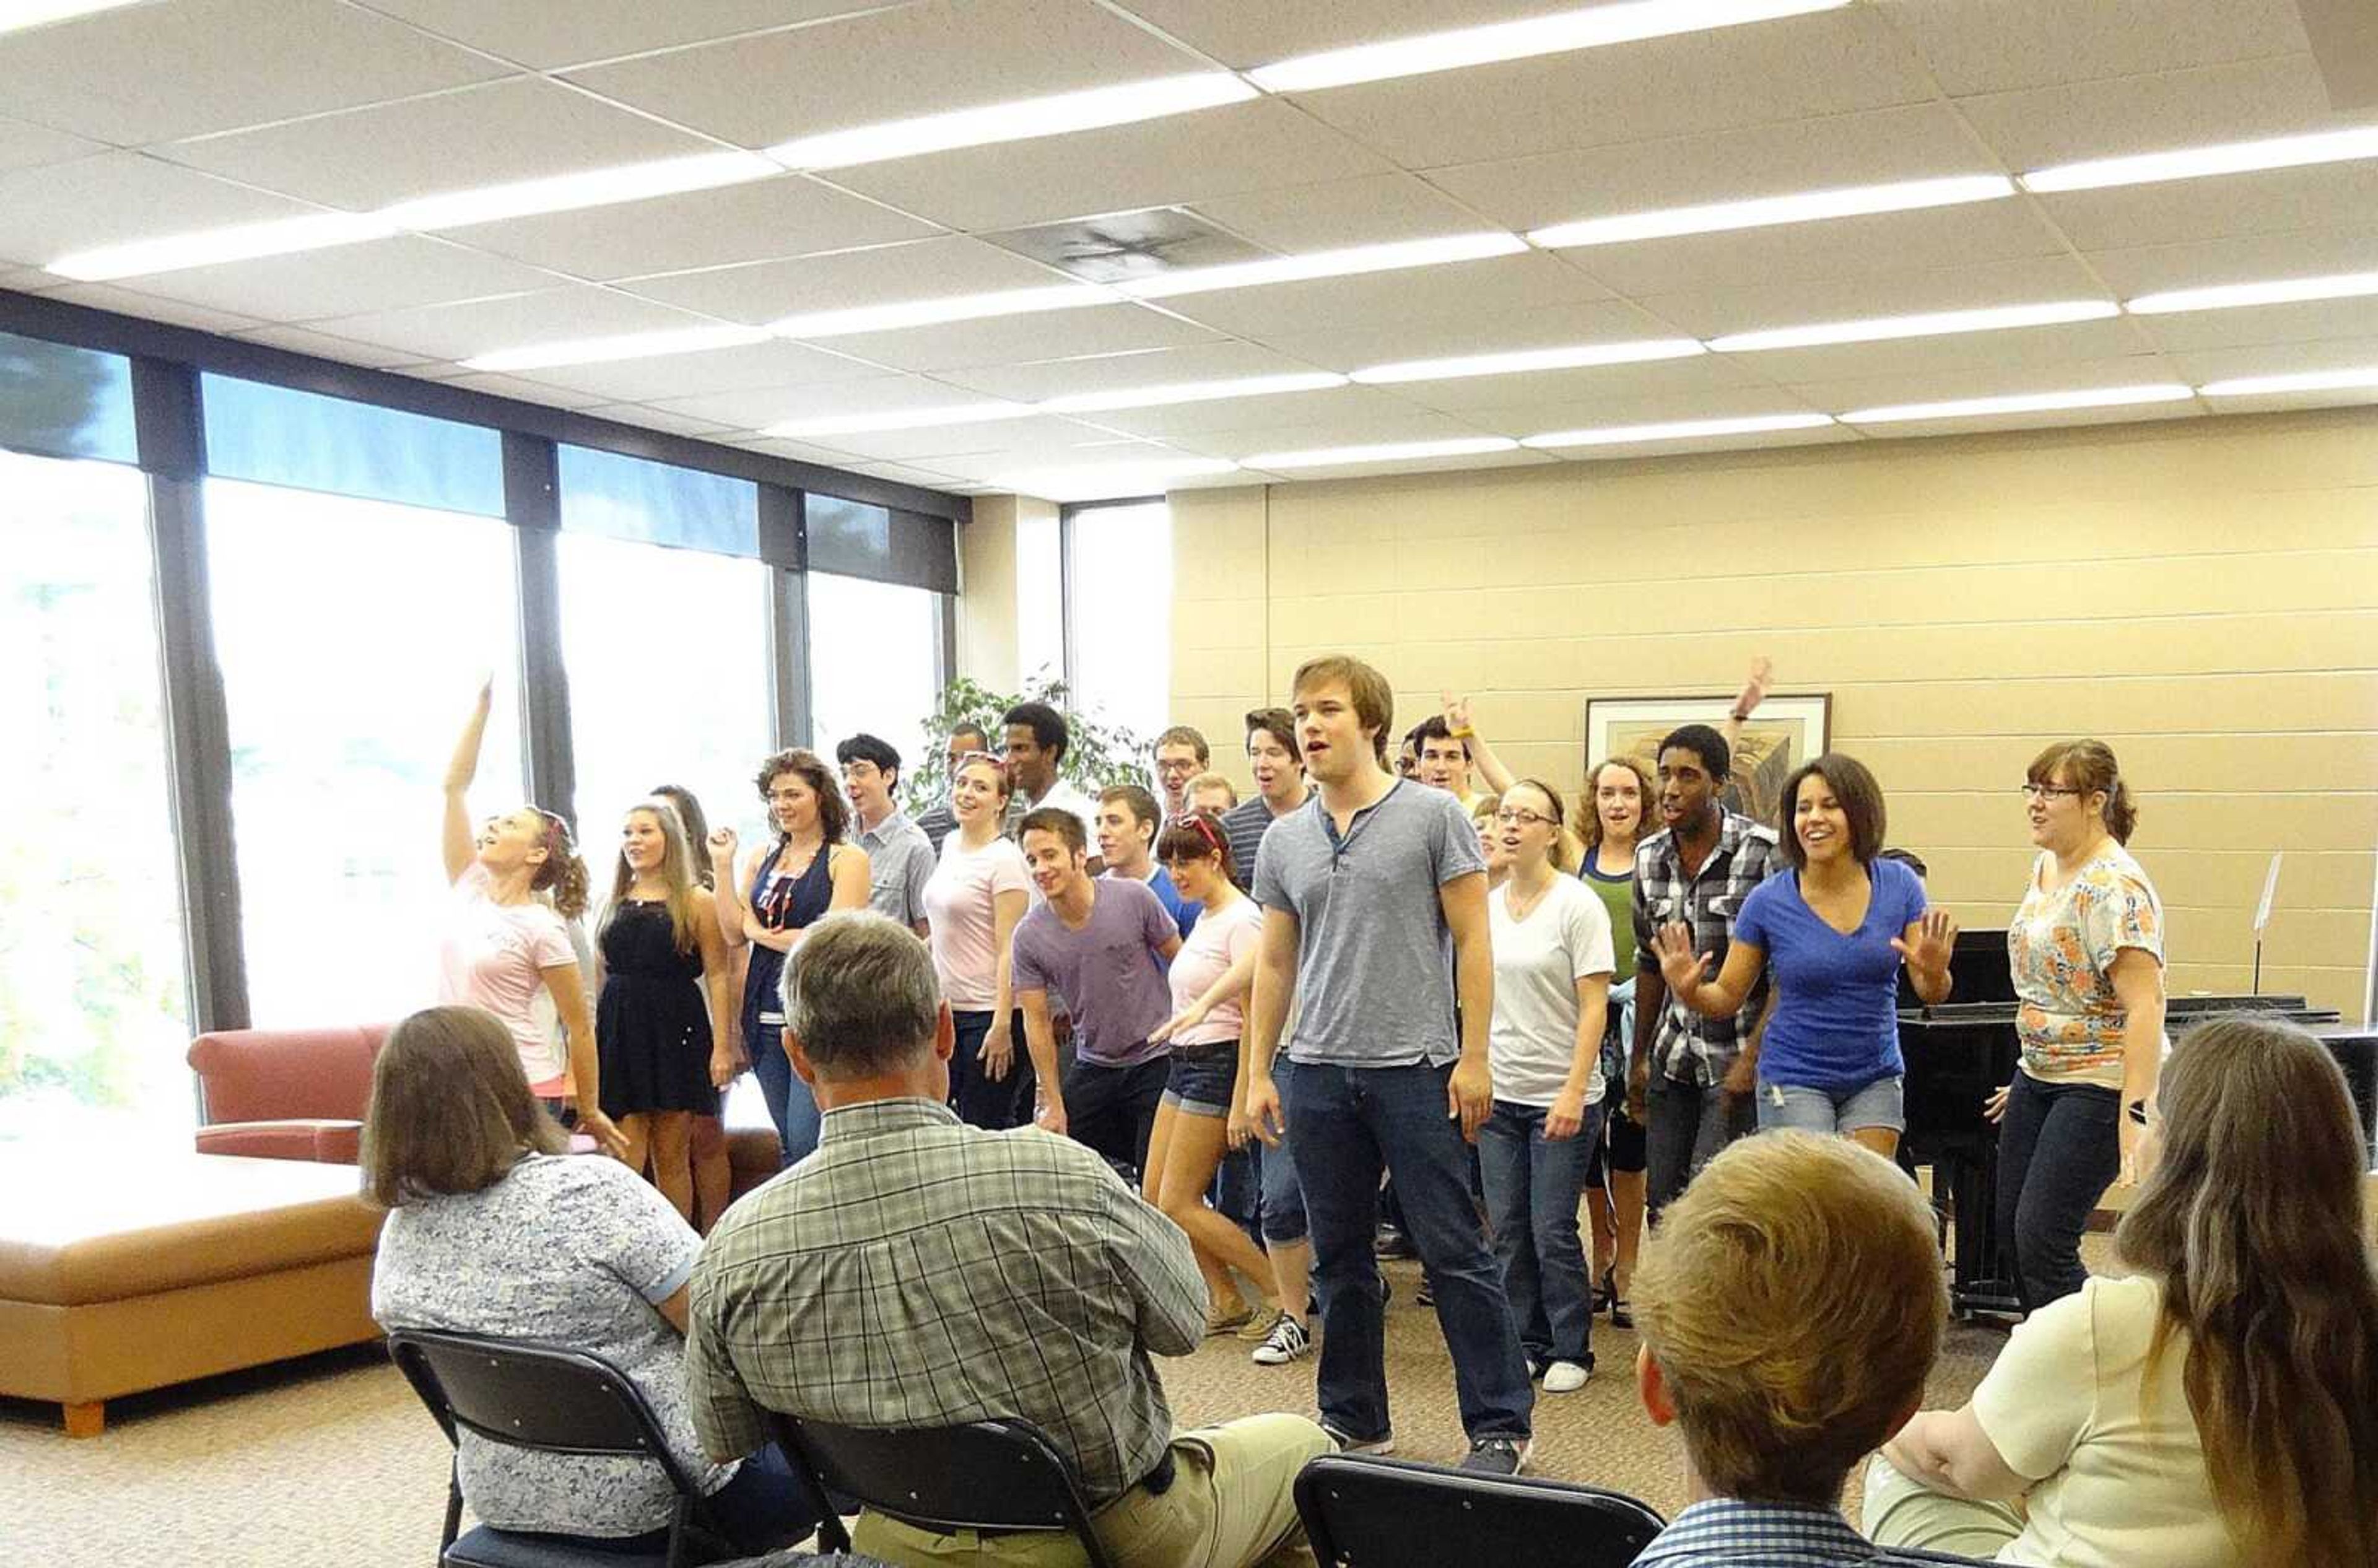 Members of the cast for the upcoming performance "Grease" performed a preview on Sept. 12 in Kent Library. Submitted photo